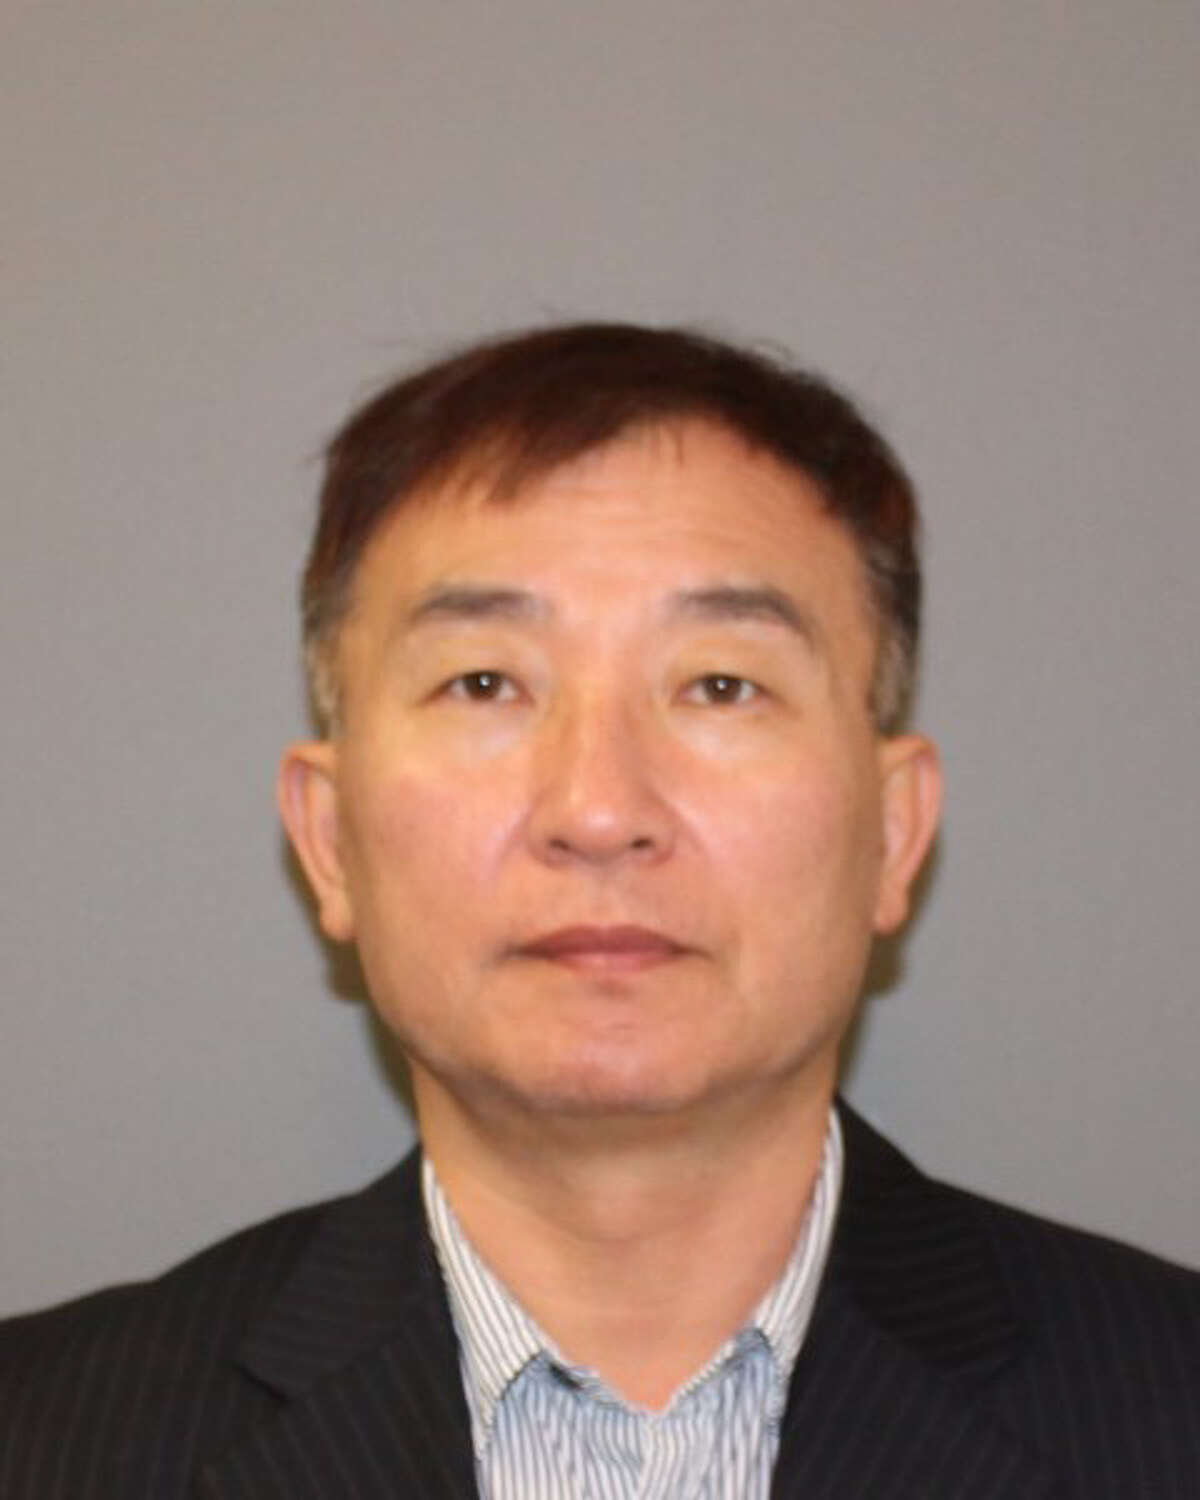 Kim Hyung has been charged by Shelton police with sexually assaulting four more women while giving them a massage.